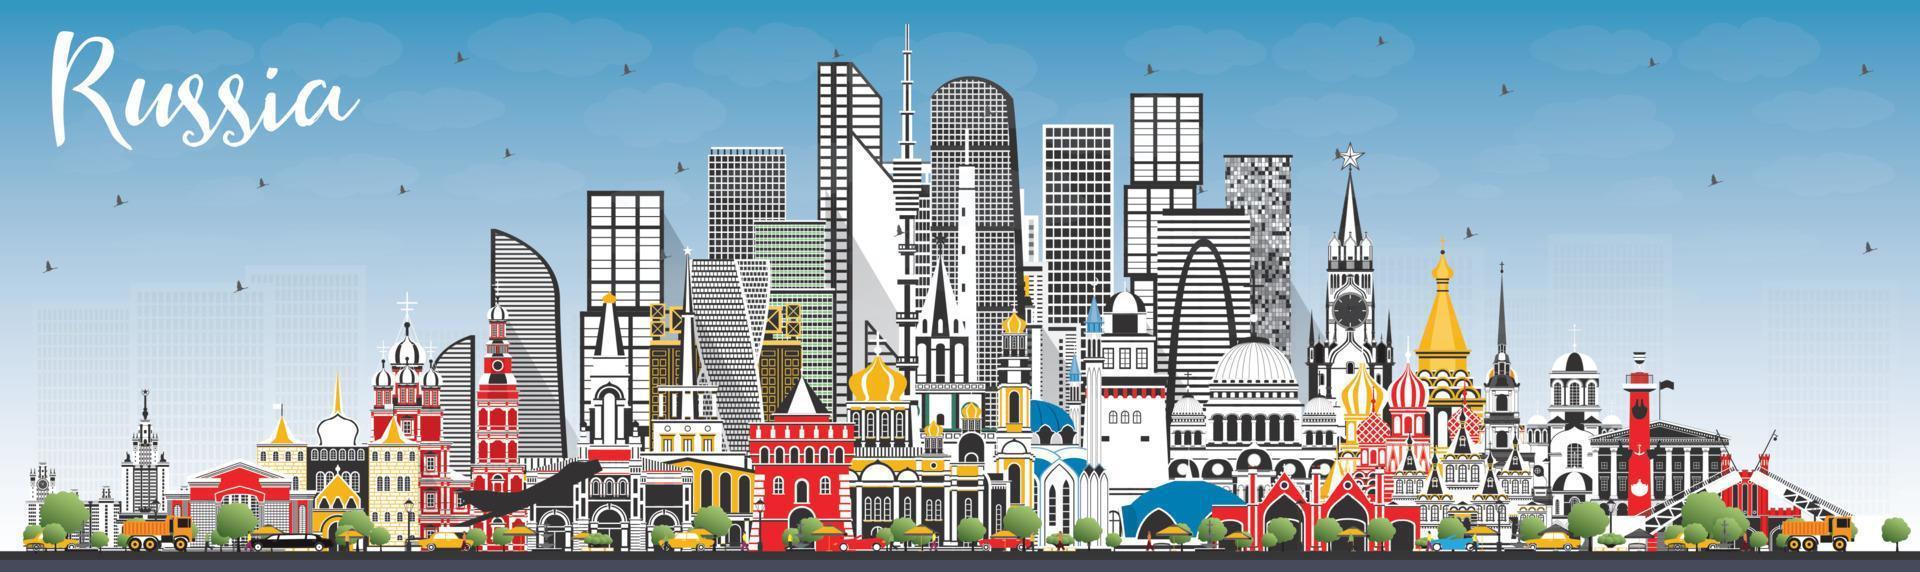 Russia City Skyline with Gray Buildings and Blue Sky. vector